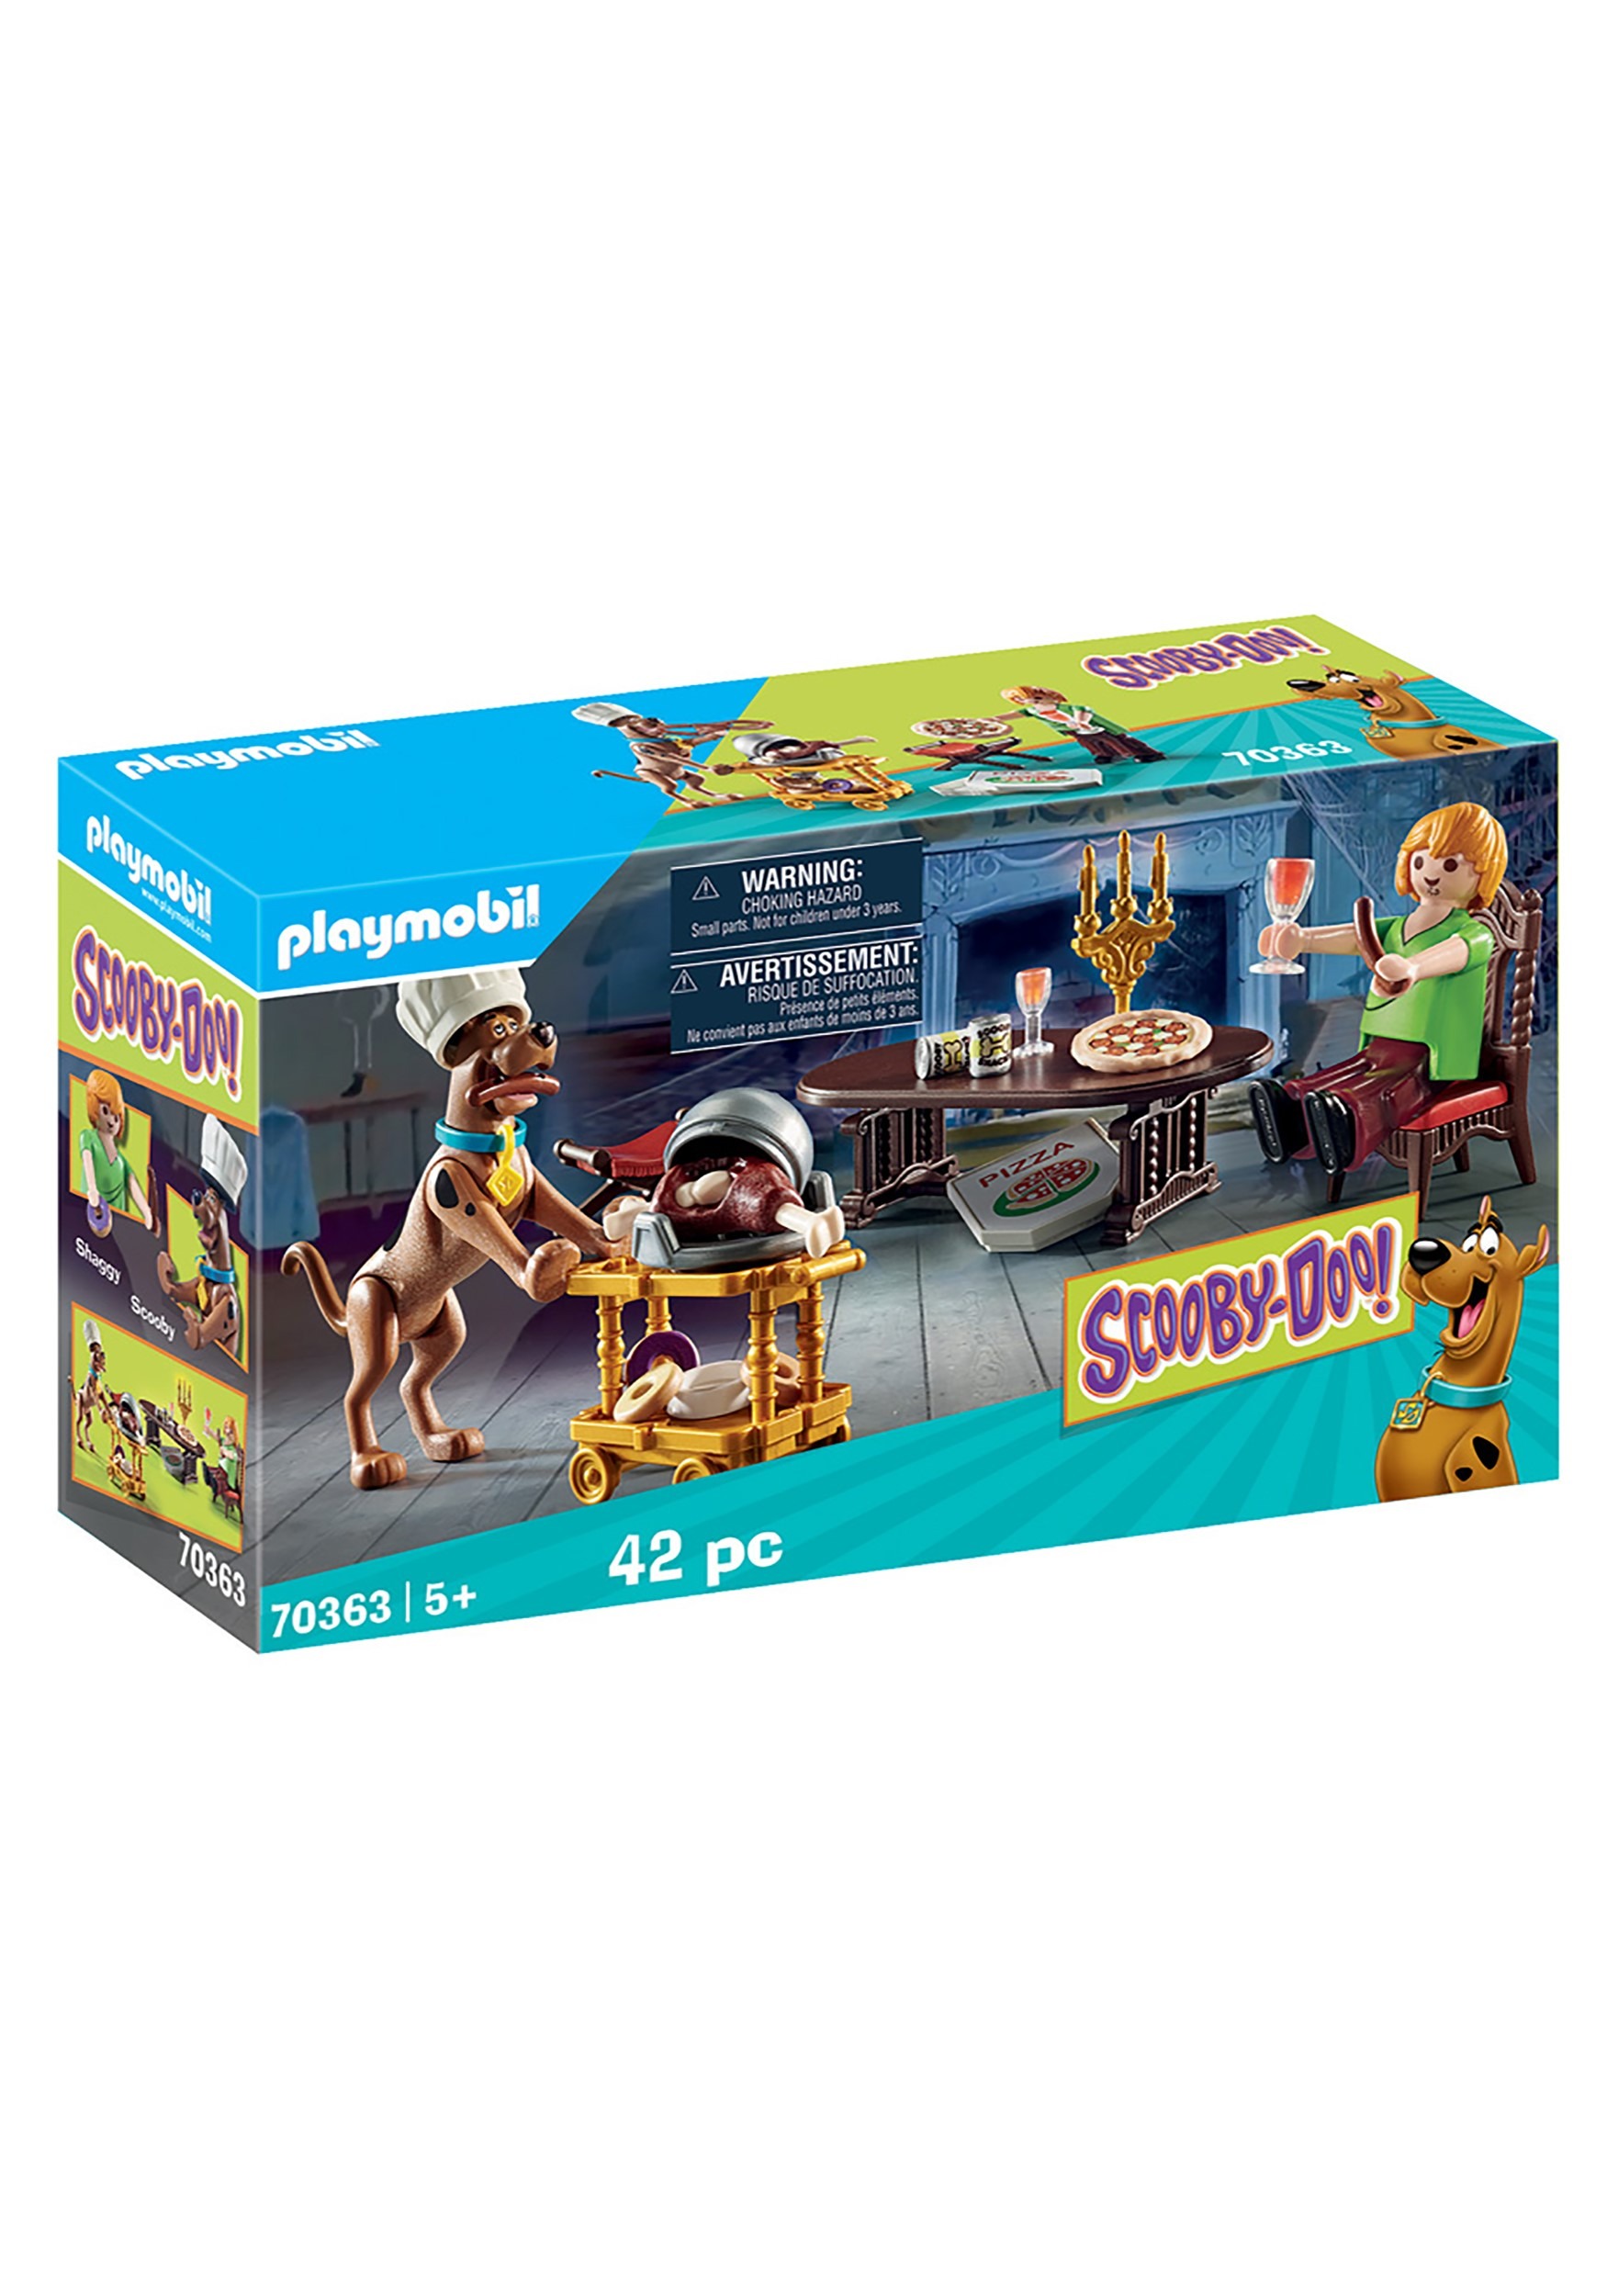 Playmobil Scooby Doo! Dinner with Shaggy Playset